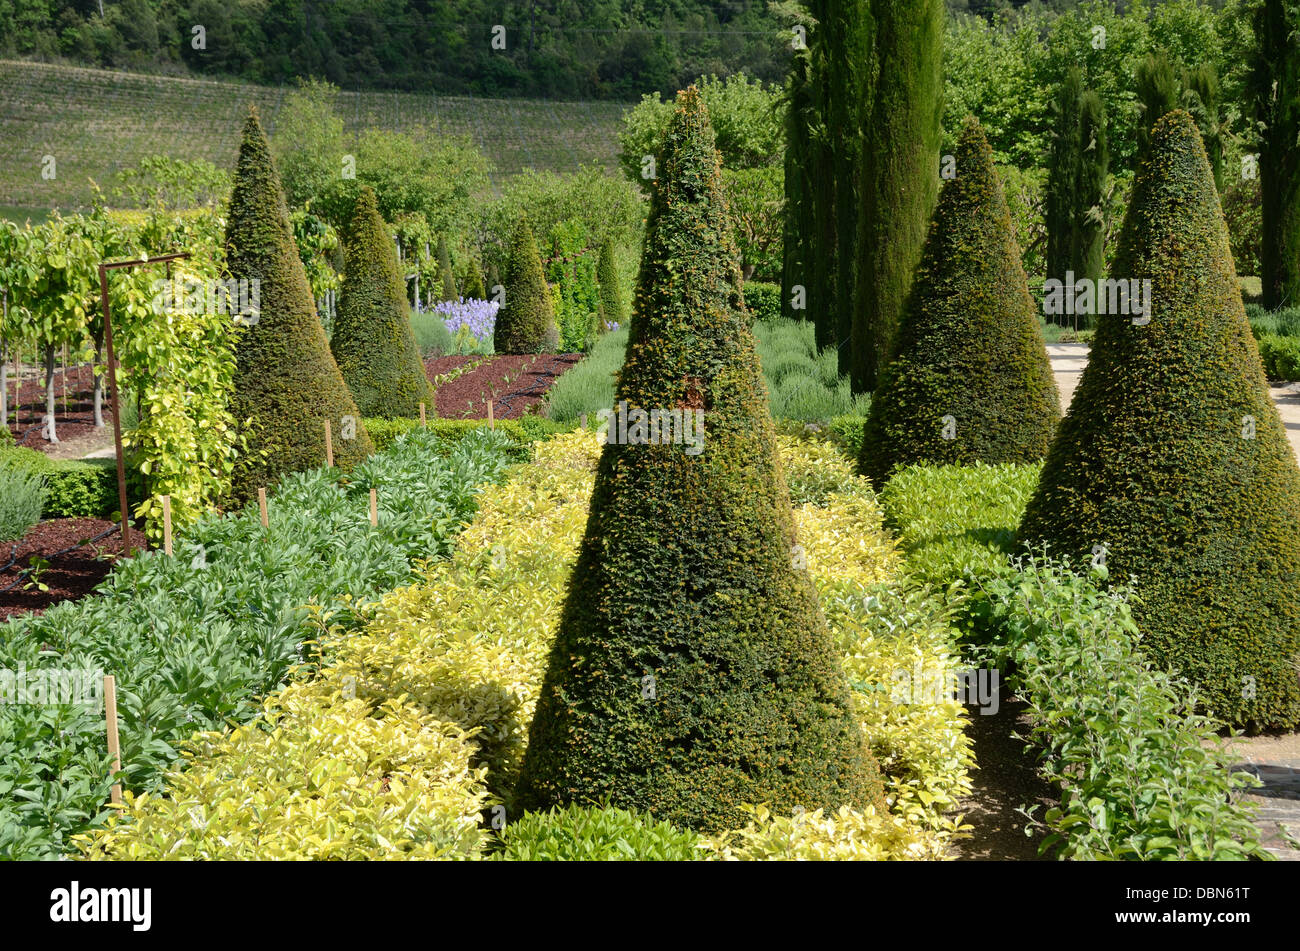 Topiary Gardens with Cone Shaped Yew Trees & Clipped Cypress Trees Château Val Joannis Pertuis Luberon Provence France Stock Photo